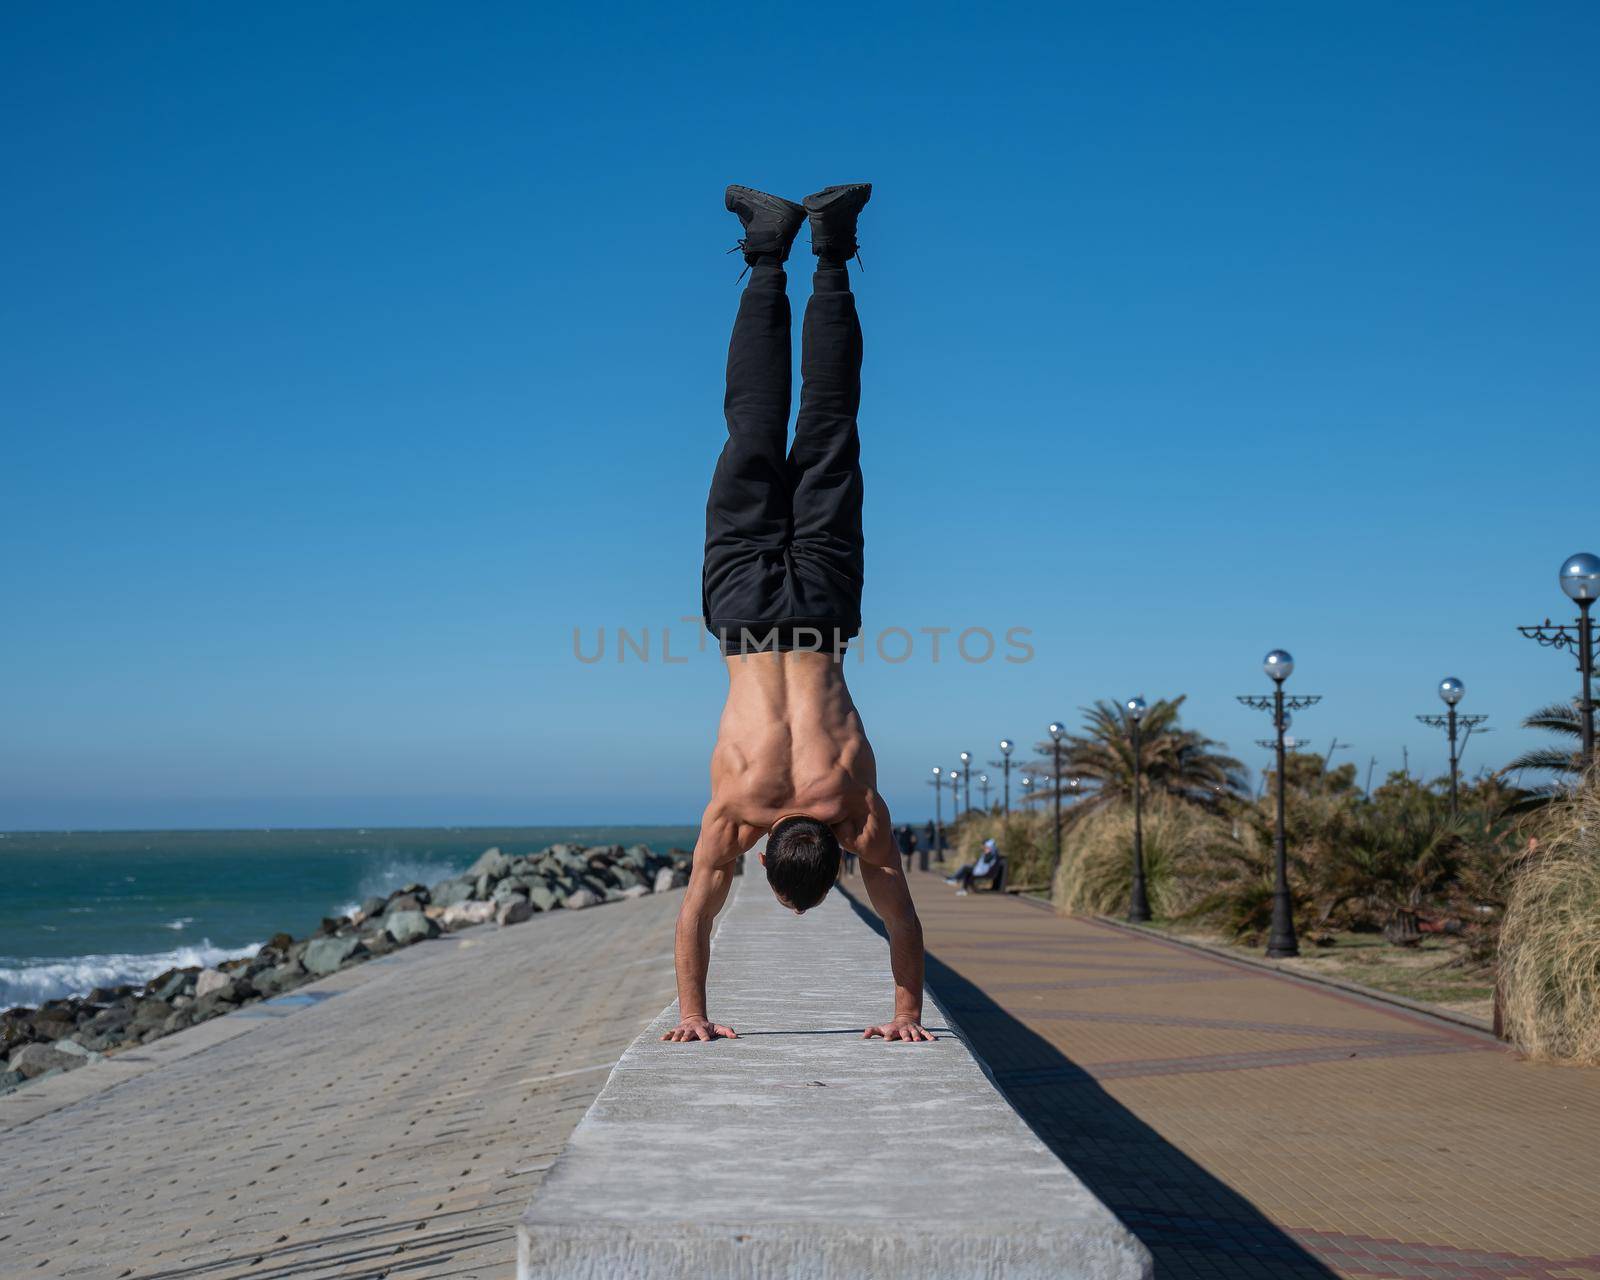 Shirtless man doing a handstand on the seashore